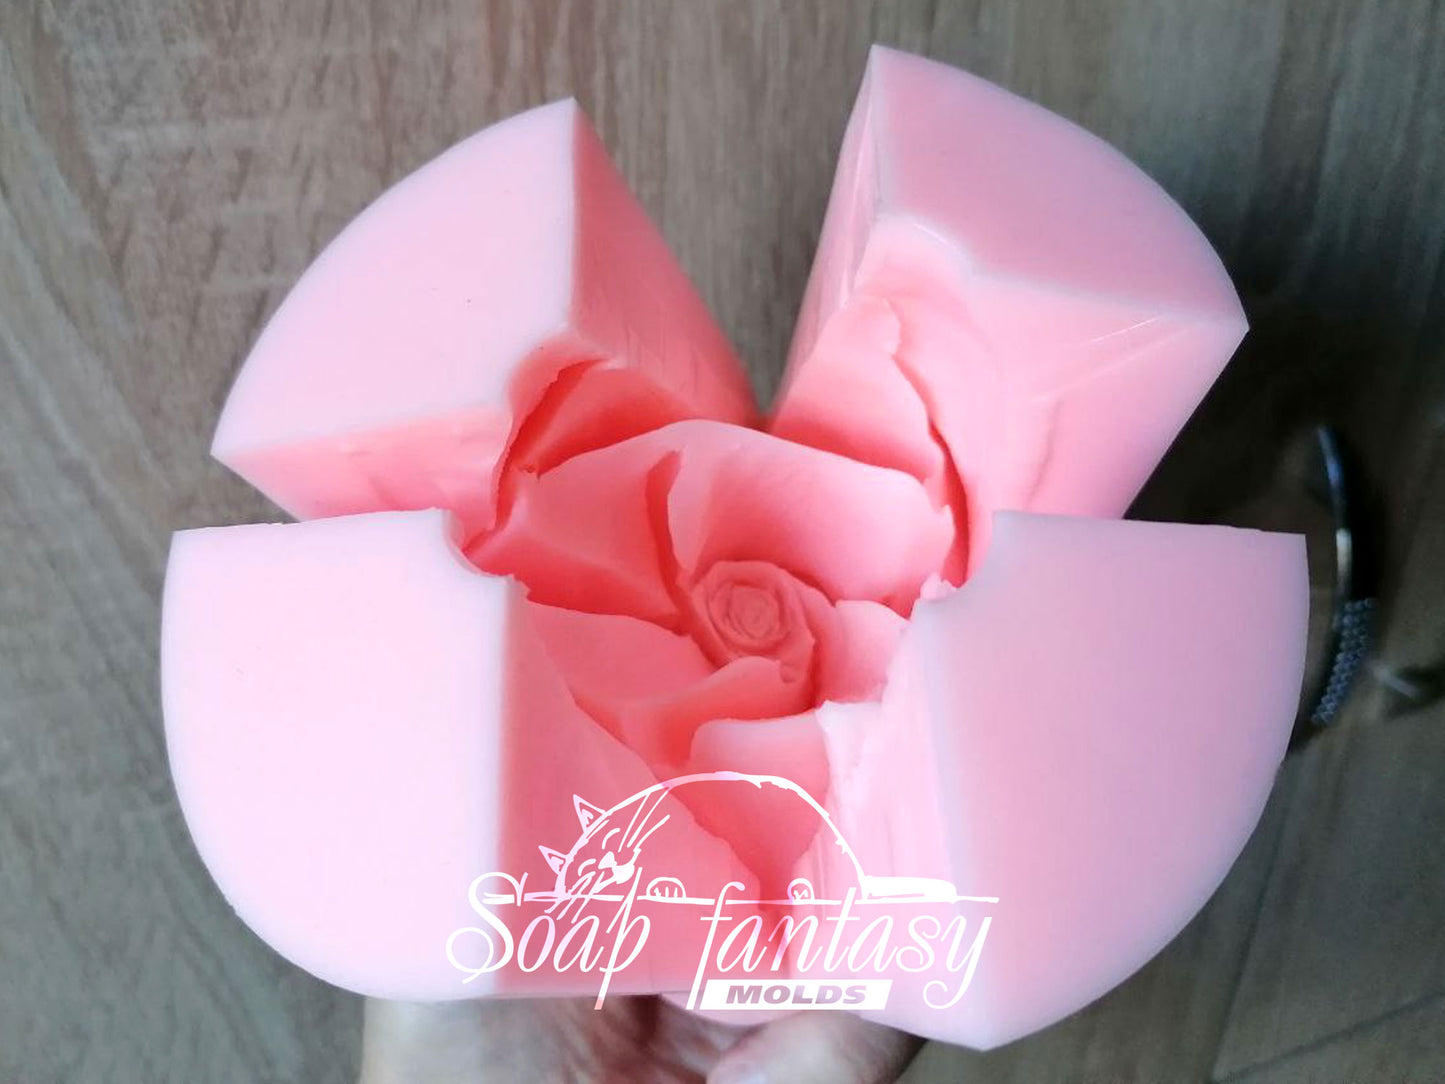 BIG rose "Grace" silicone mold for soap making